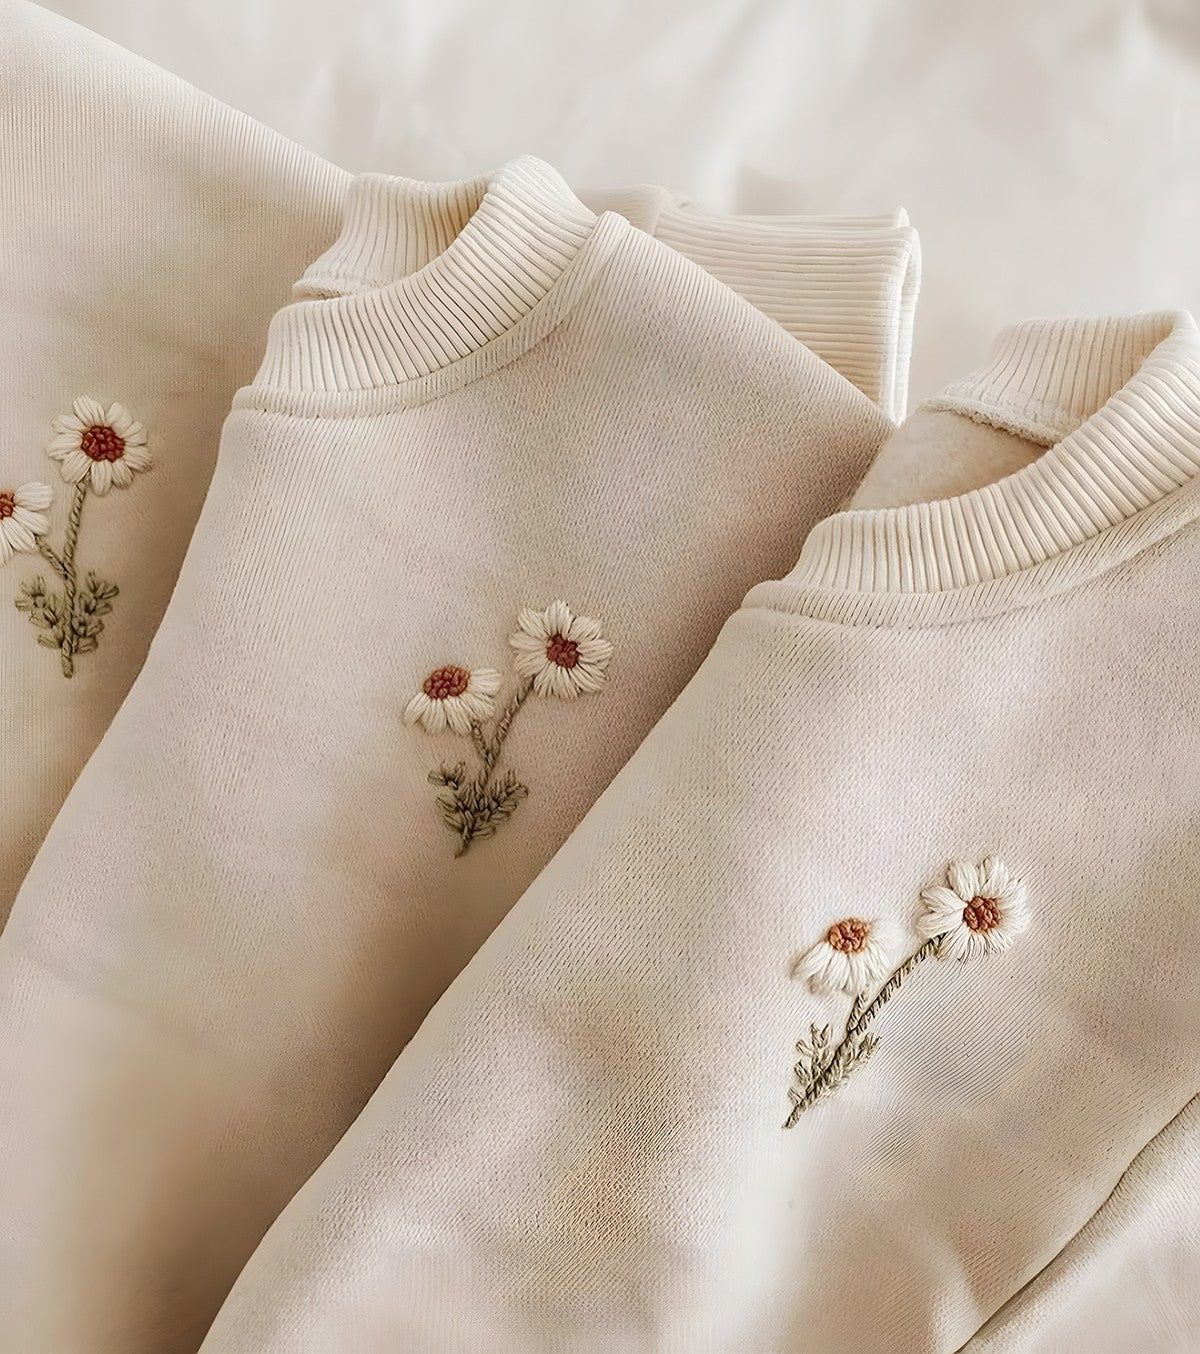 Plain set with flower embroidery